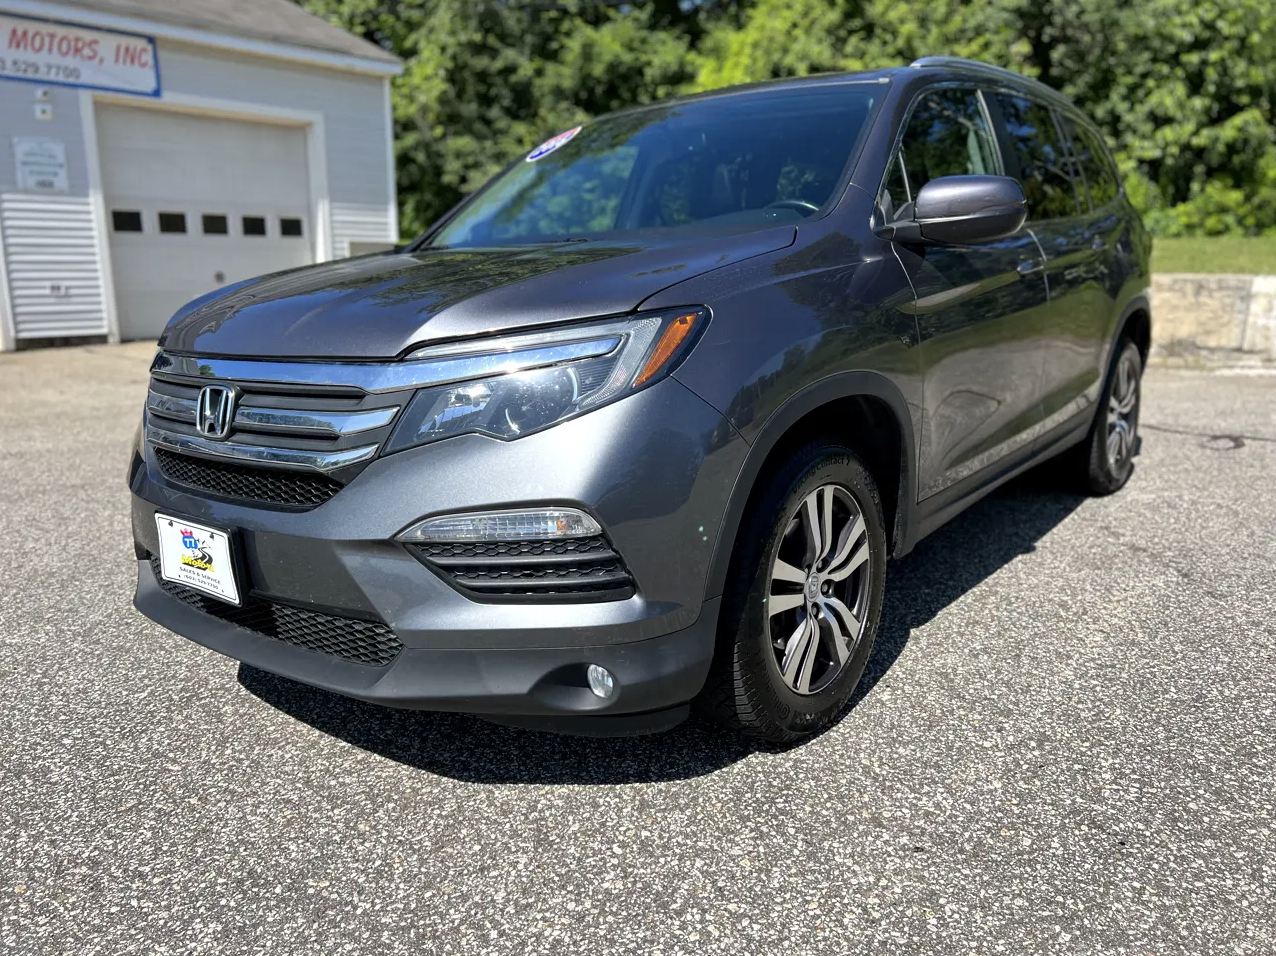 The Power of Dreams: Preowned Honda Vehicles For Sale